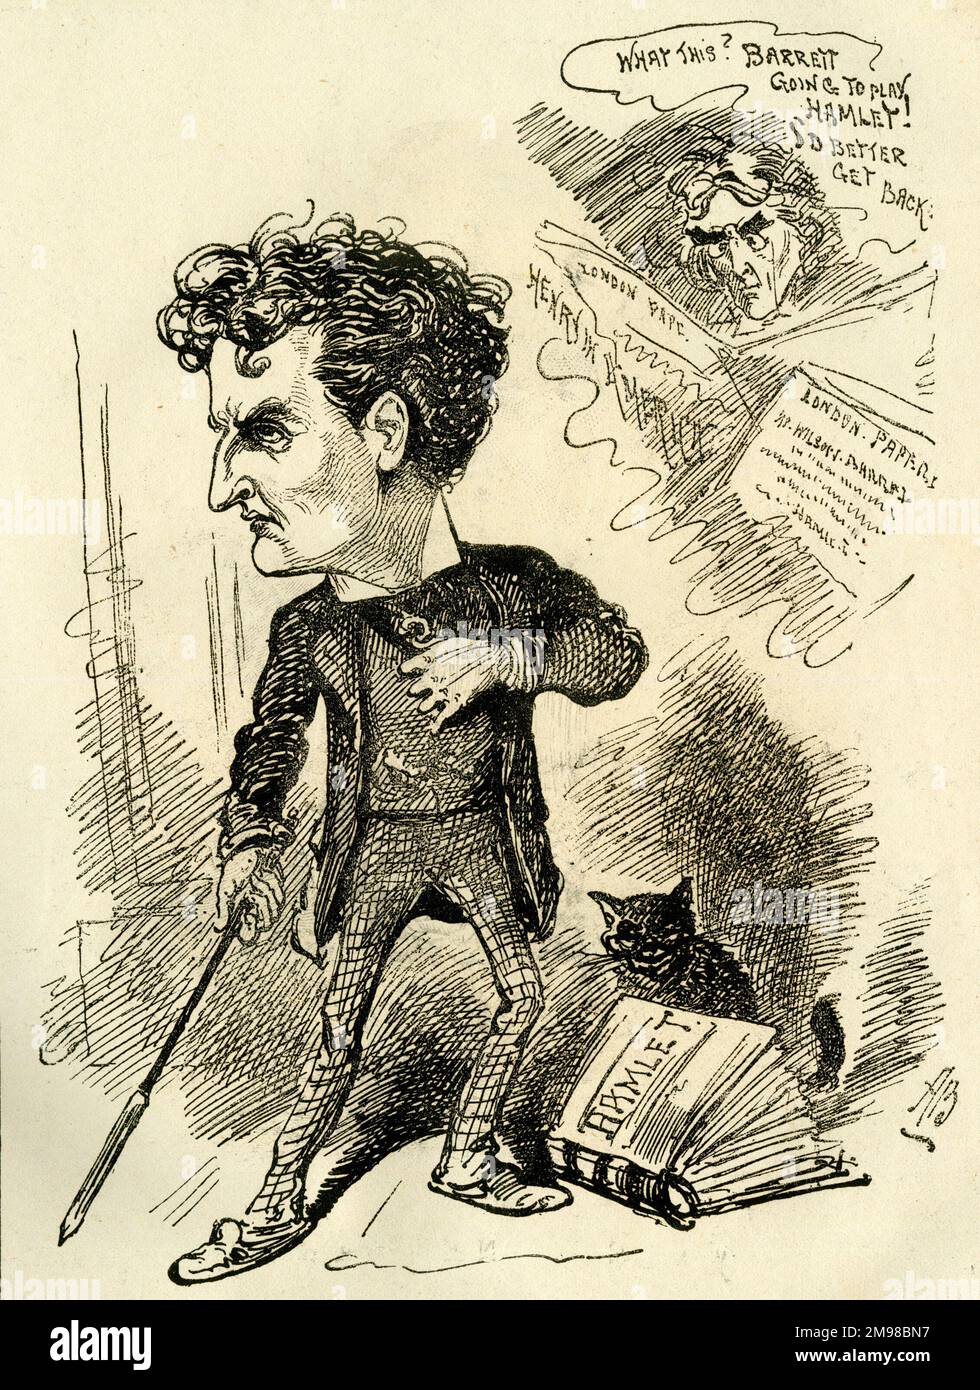 Wilson Barrett (William Henry Barrett; 1846-1904), actor, theatre manager and playwright -- More Study!  Seen here preparing to play Hamlet, to the consernation of Henry Irving, who thinks he'd better get back from his American tour. Stock Photo